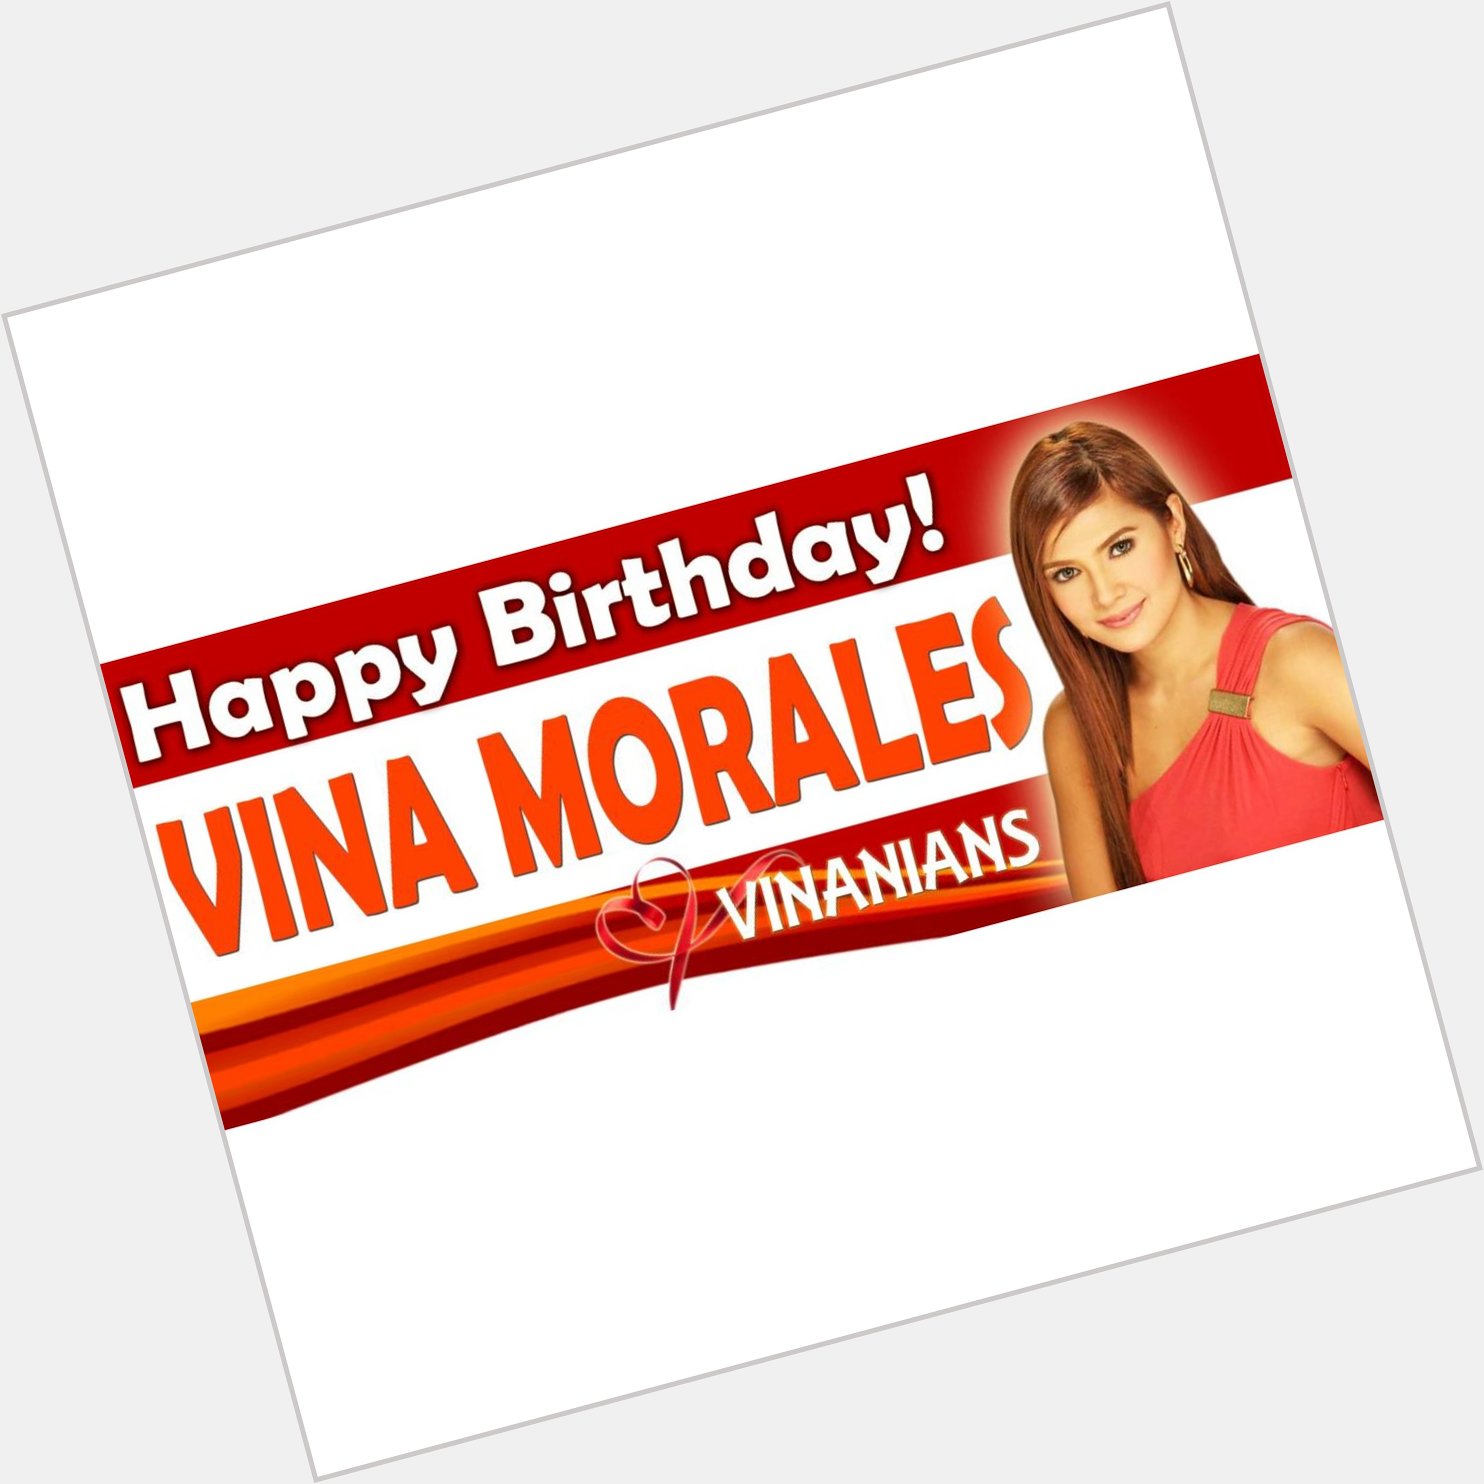 Happy Birthday to our LOVE Vina Morales.. Wishing you health, wealth and happiness. We LOVE you V I N A..  VINA 